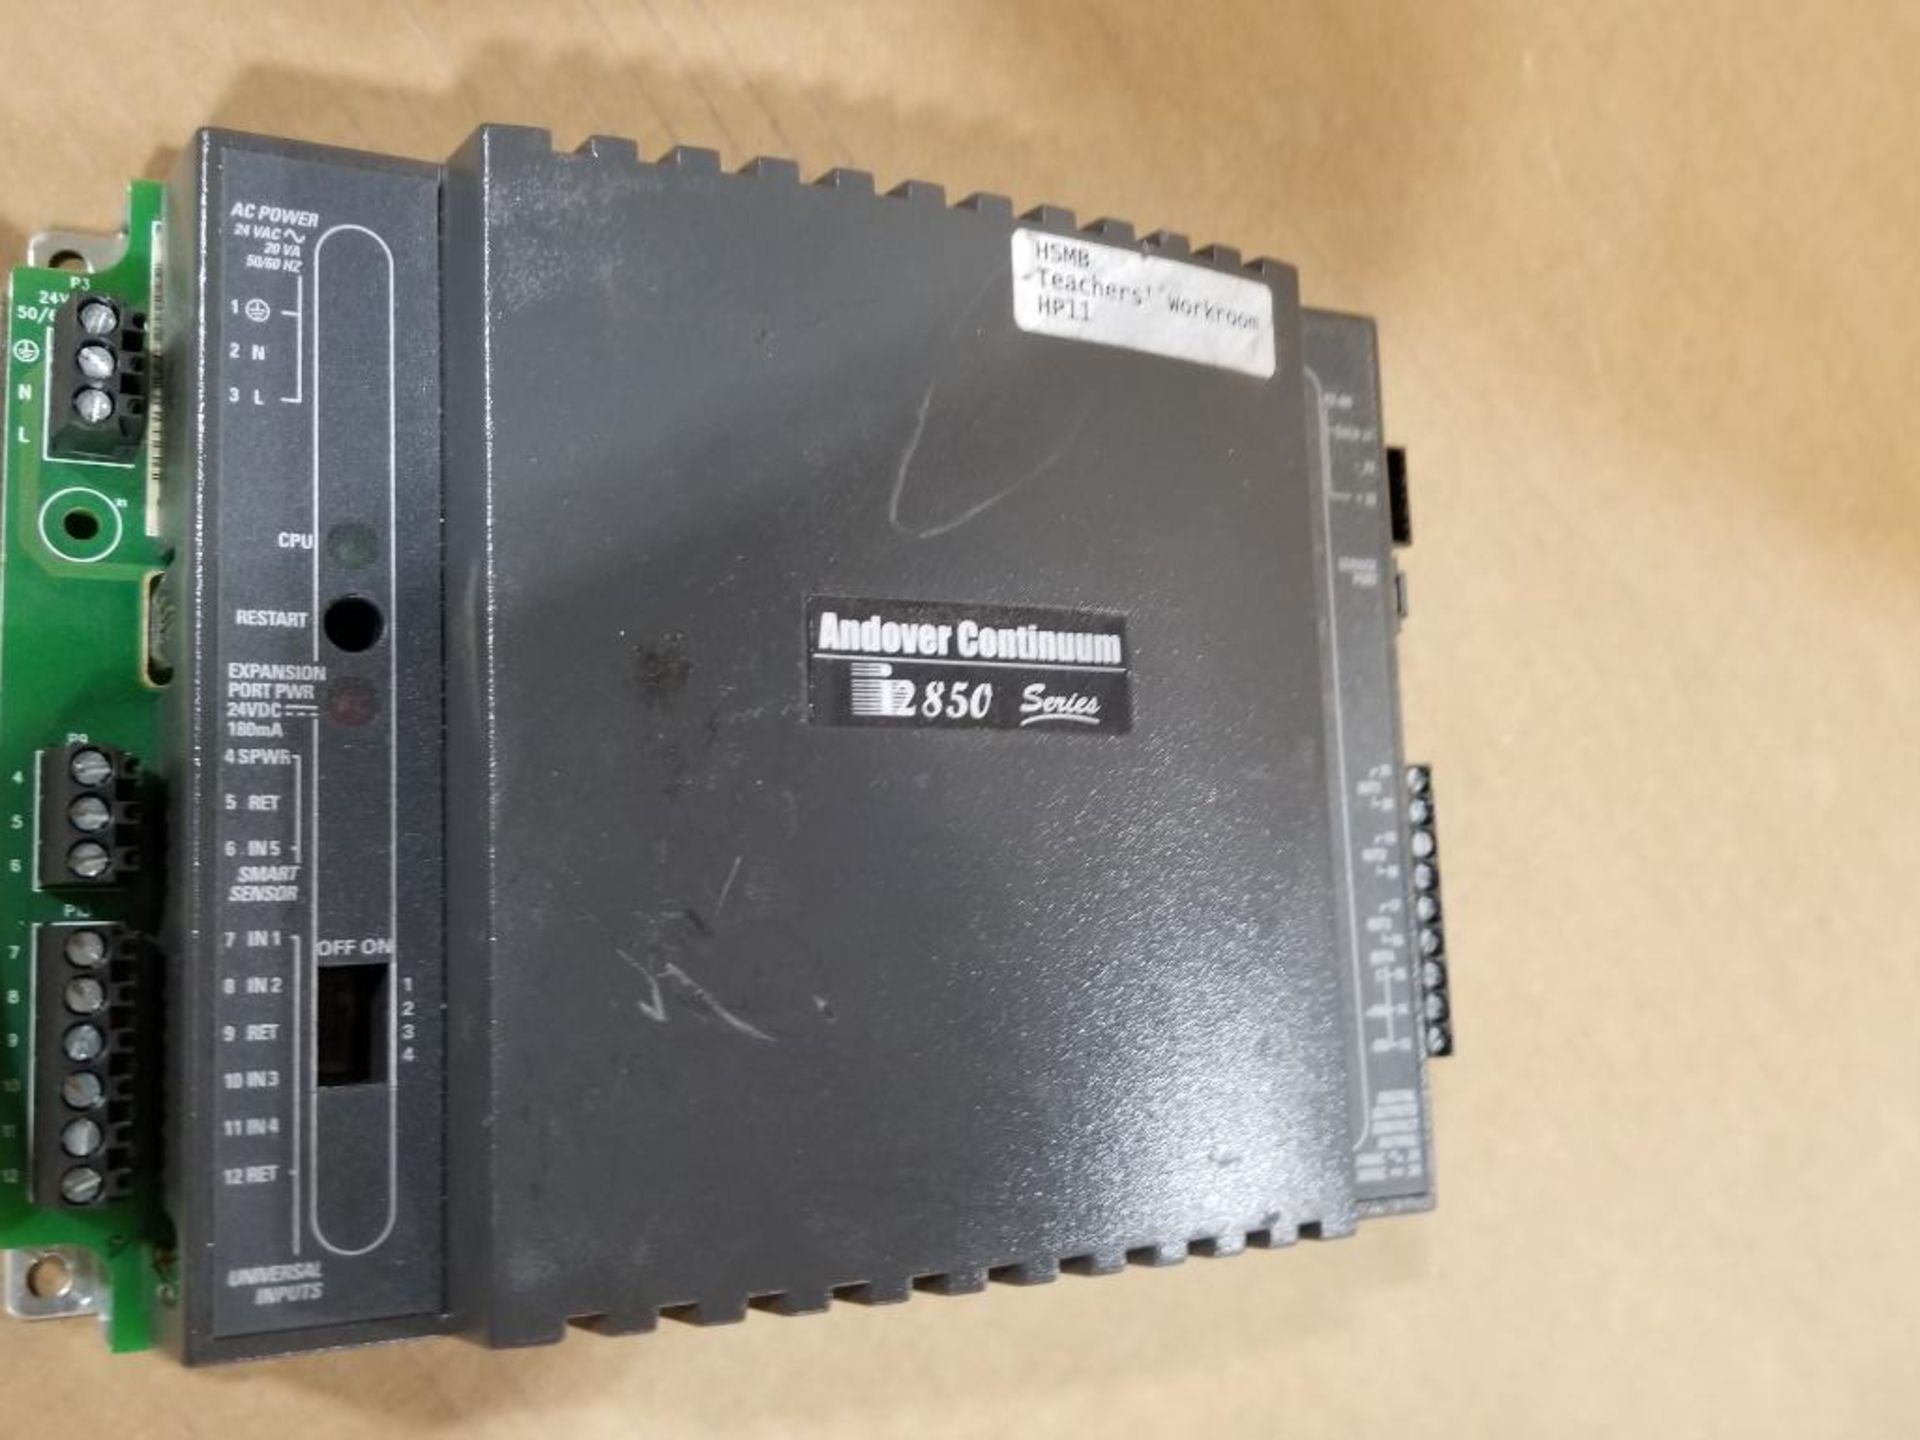 Qty 2 - Schneider Electric controller. Andover Continuum. Model B3920 and i2851. - Image 8 of 9